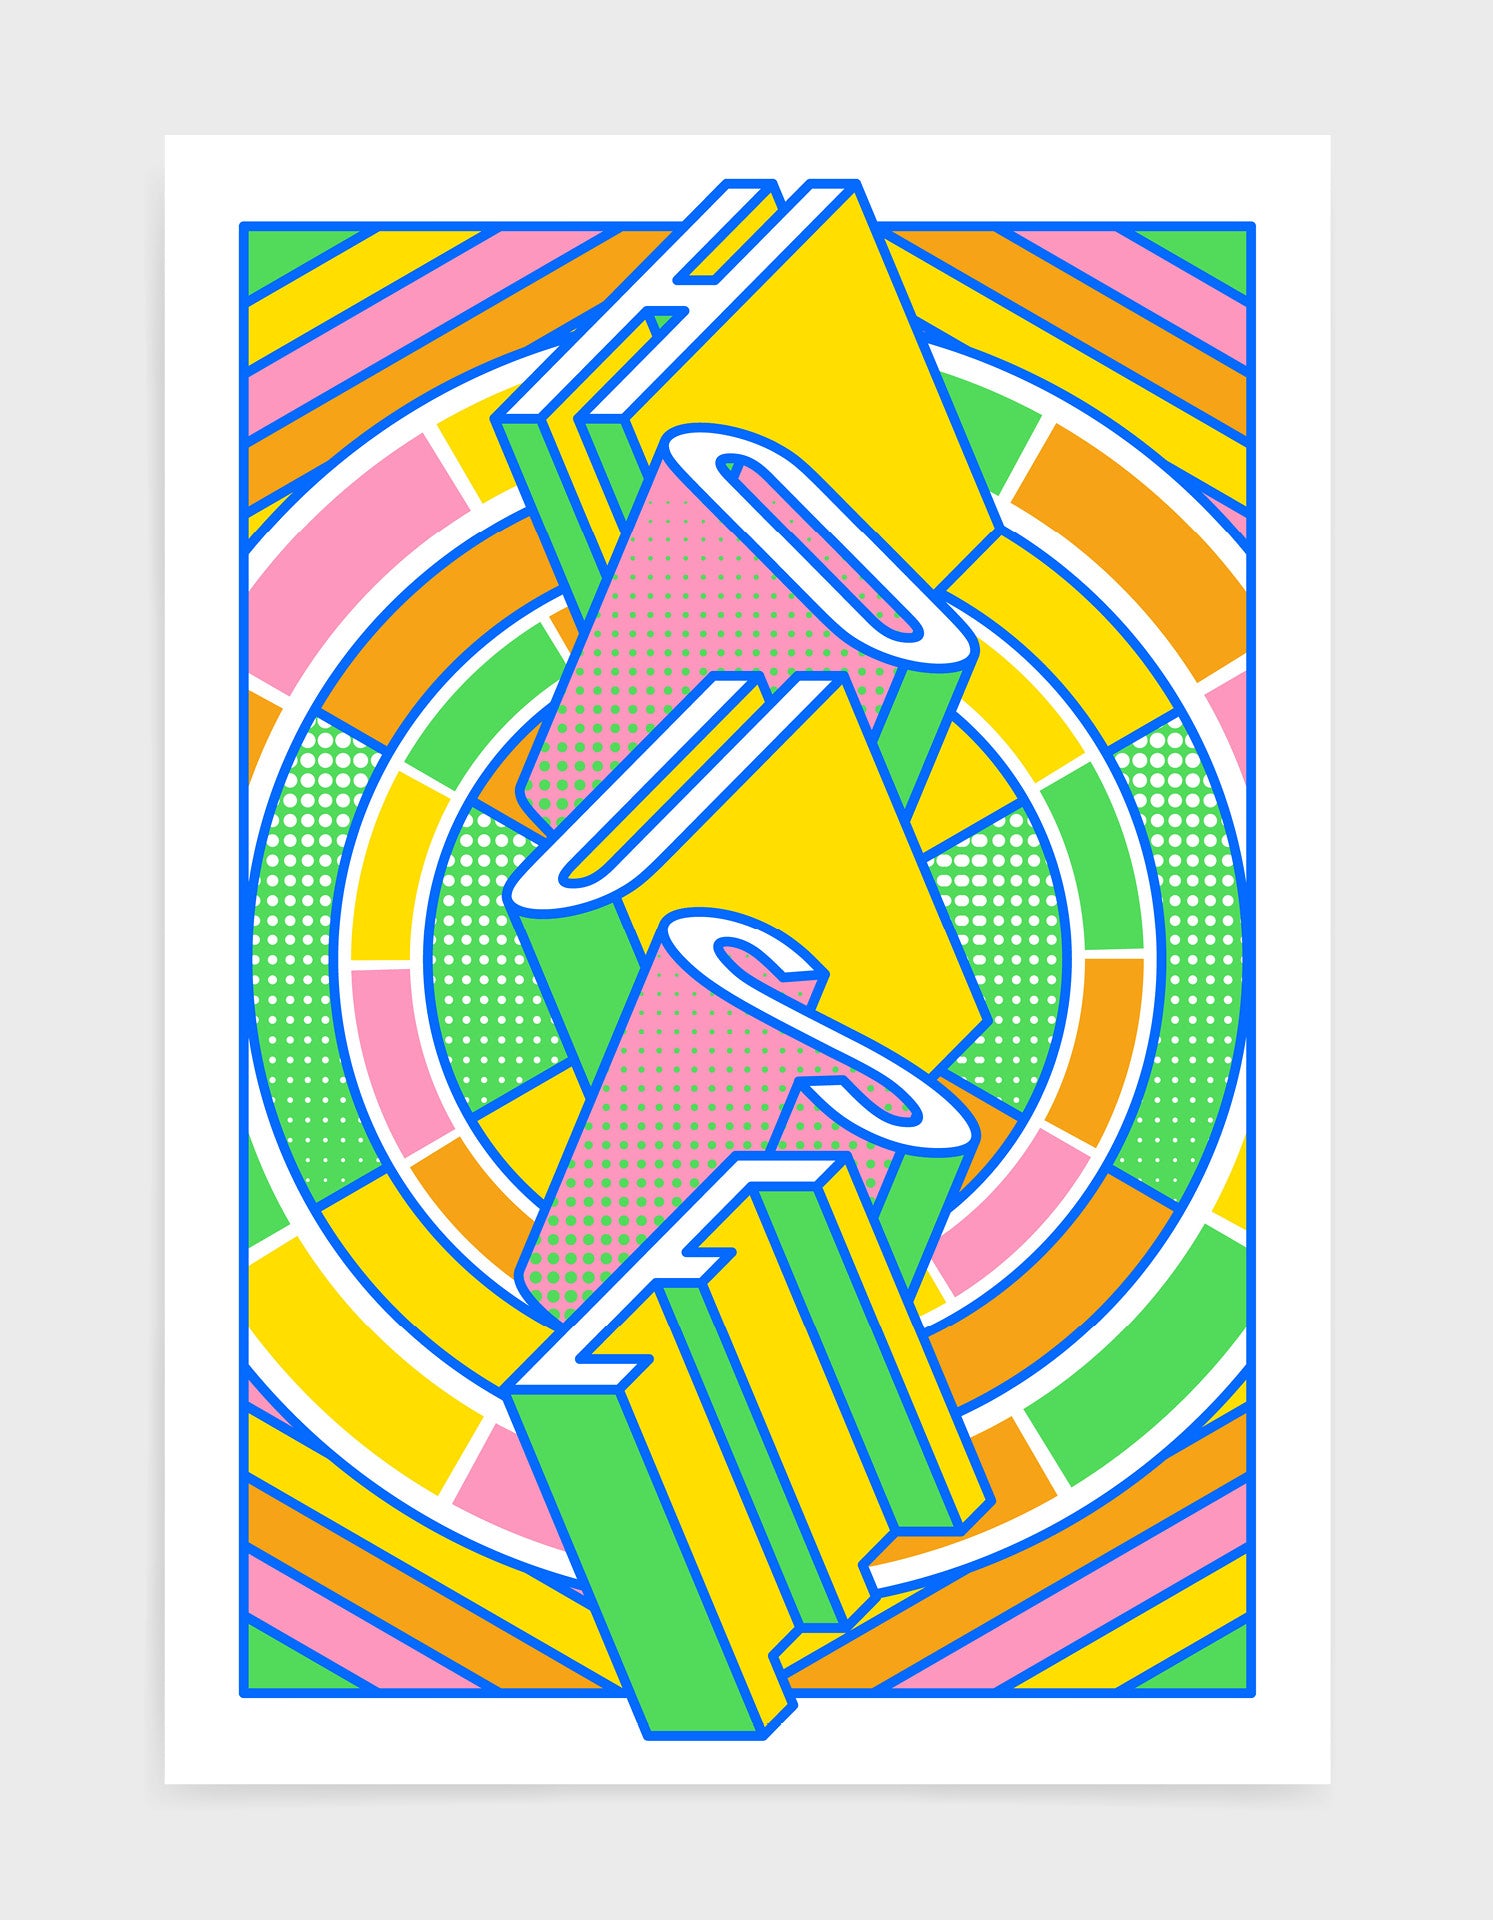 house music art print featuring a geometric abstract pattern in bold shapes and vibrant rainbow colours. Block typography depicts the word House in tumbling text